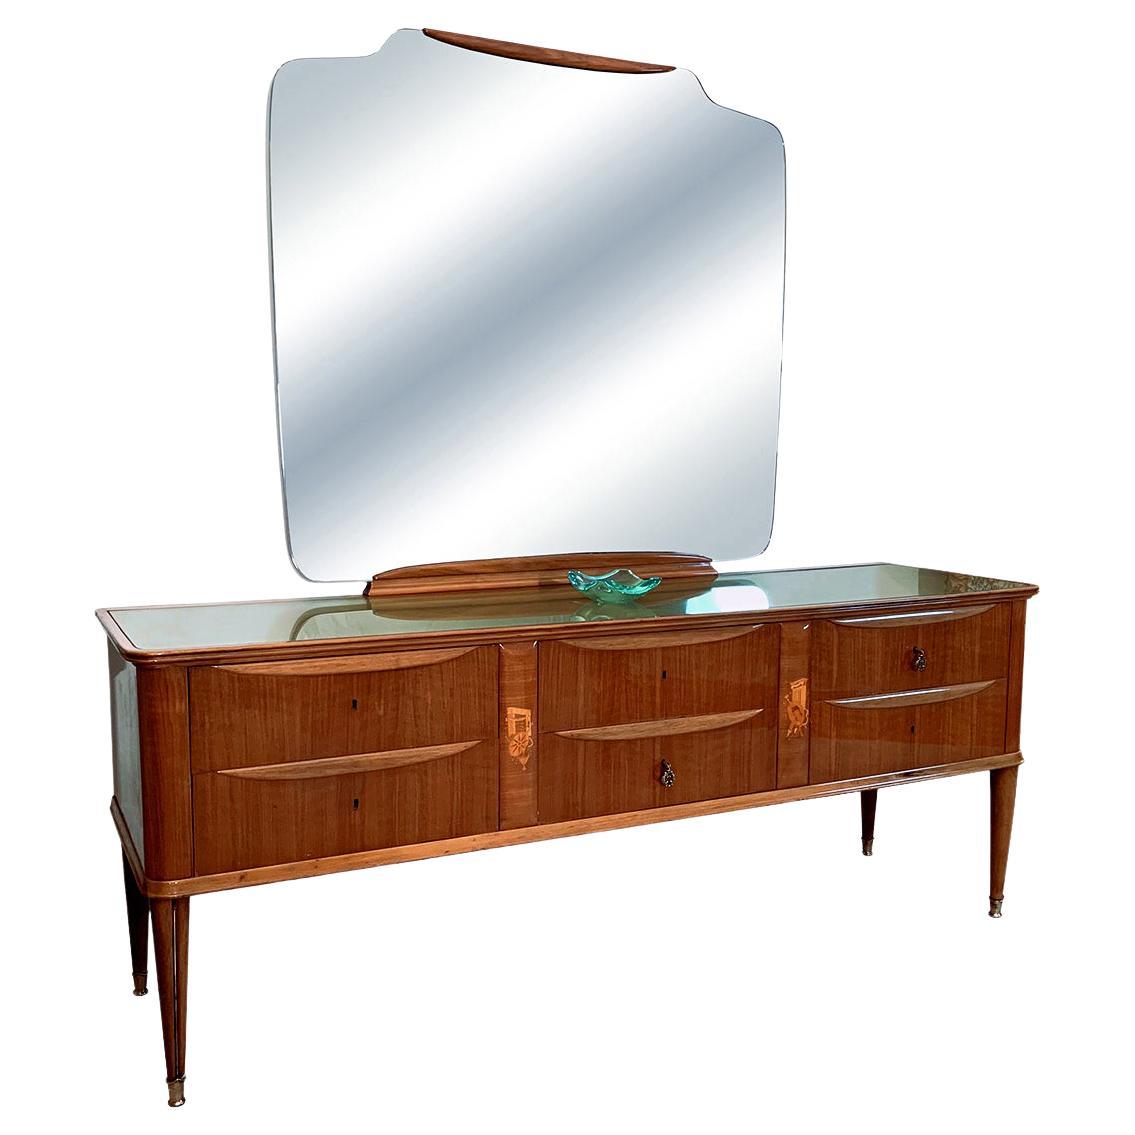 Paolo Buffa Mid-Century Walnut Chest of Drawers with Inlays and Mirror, 1950s